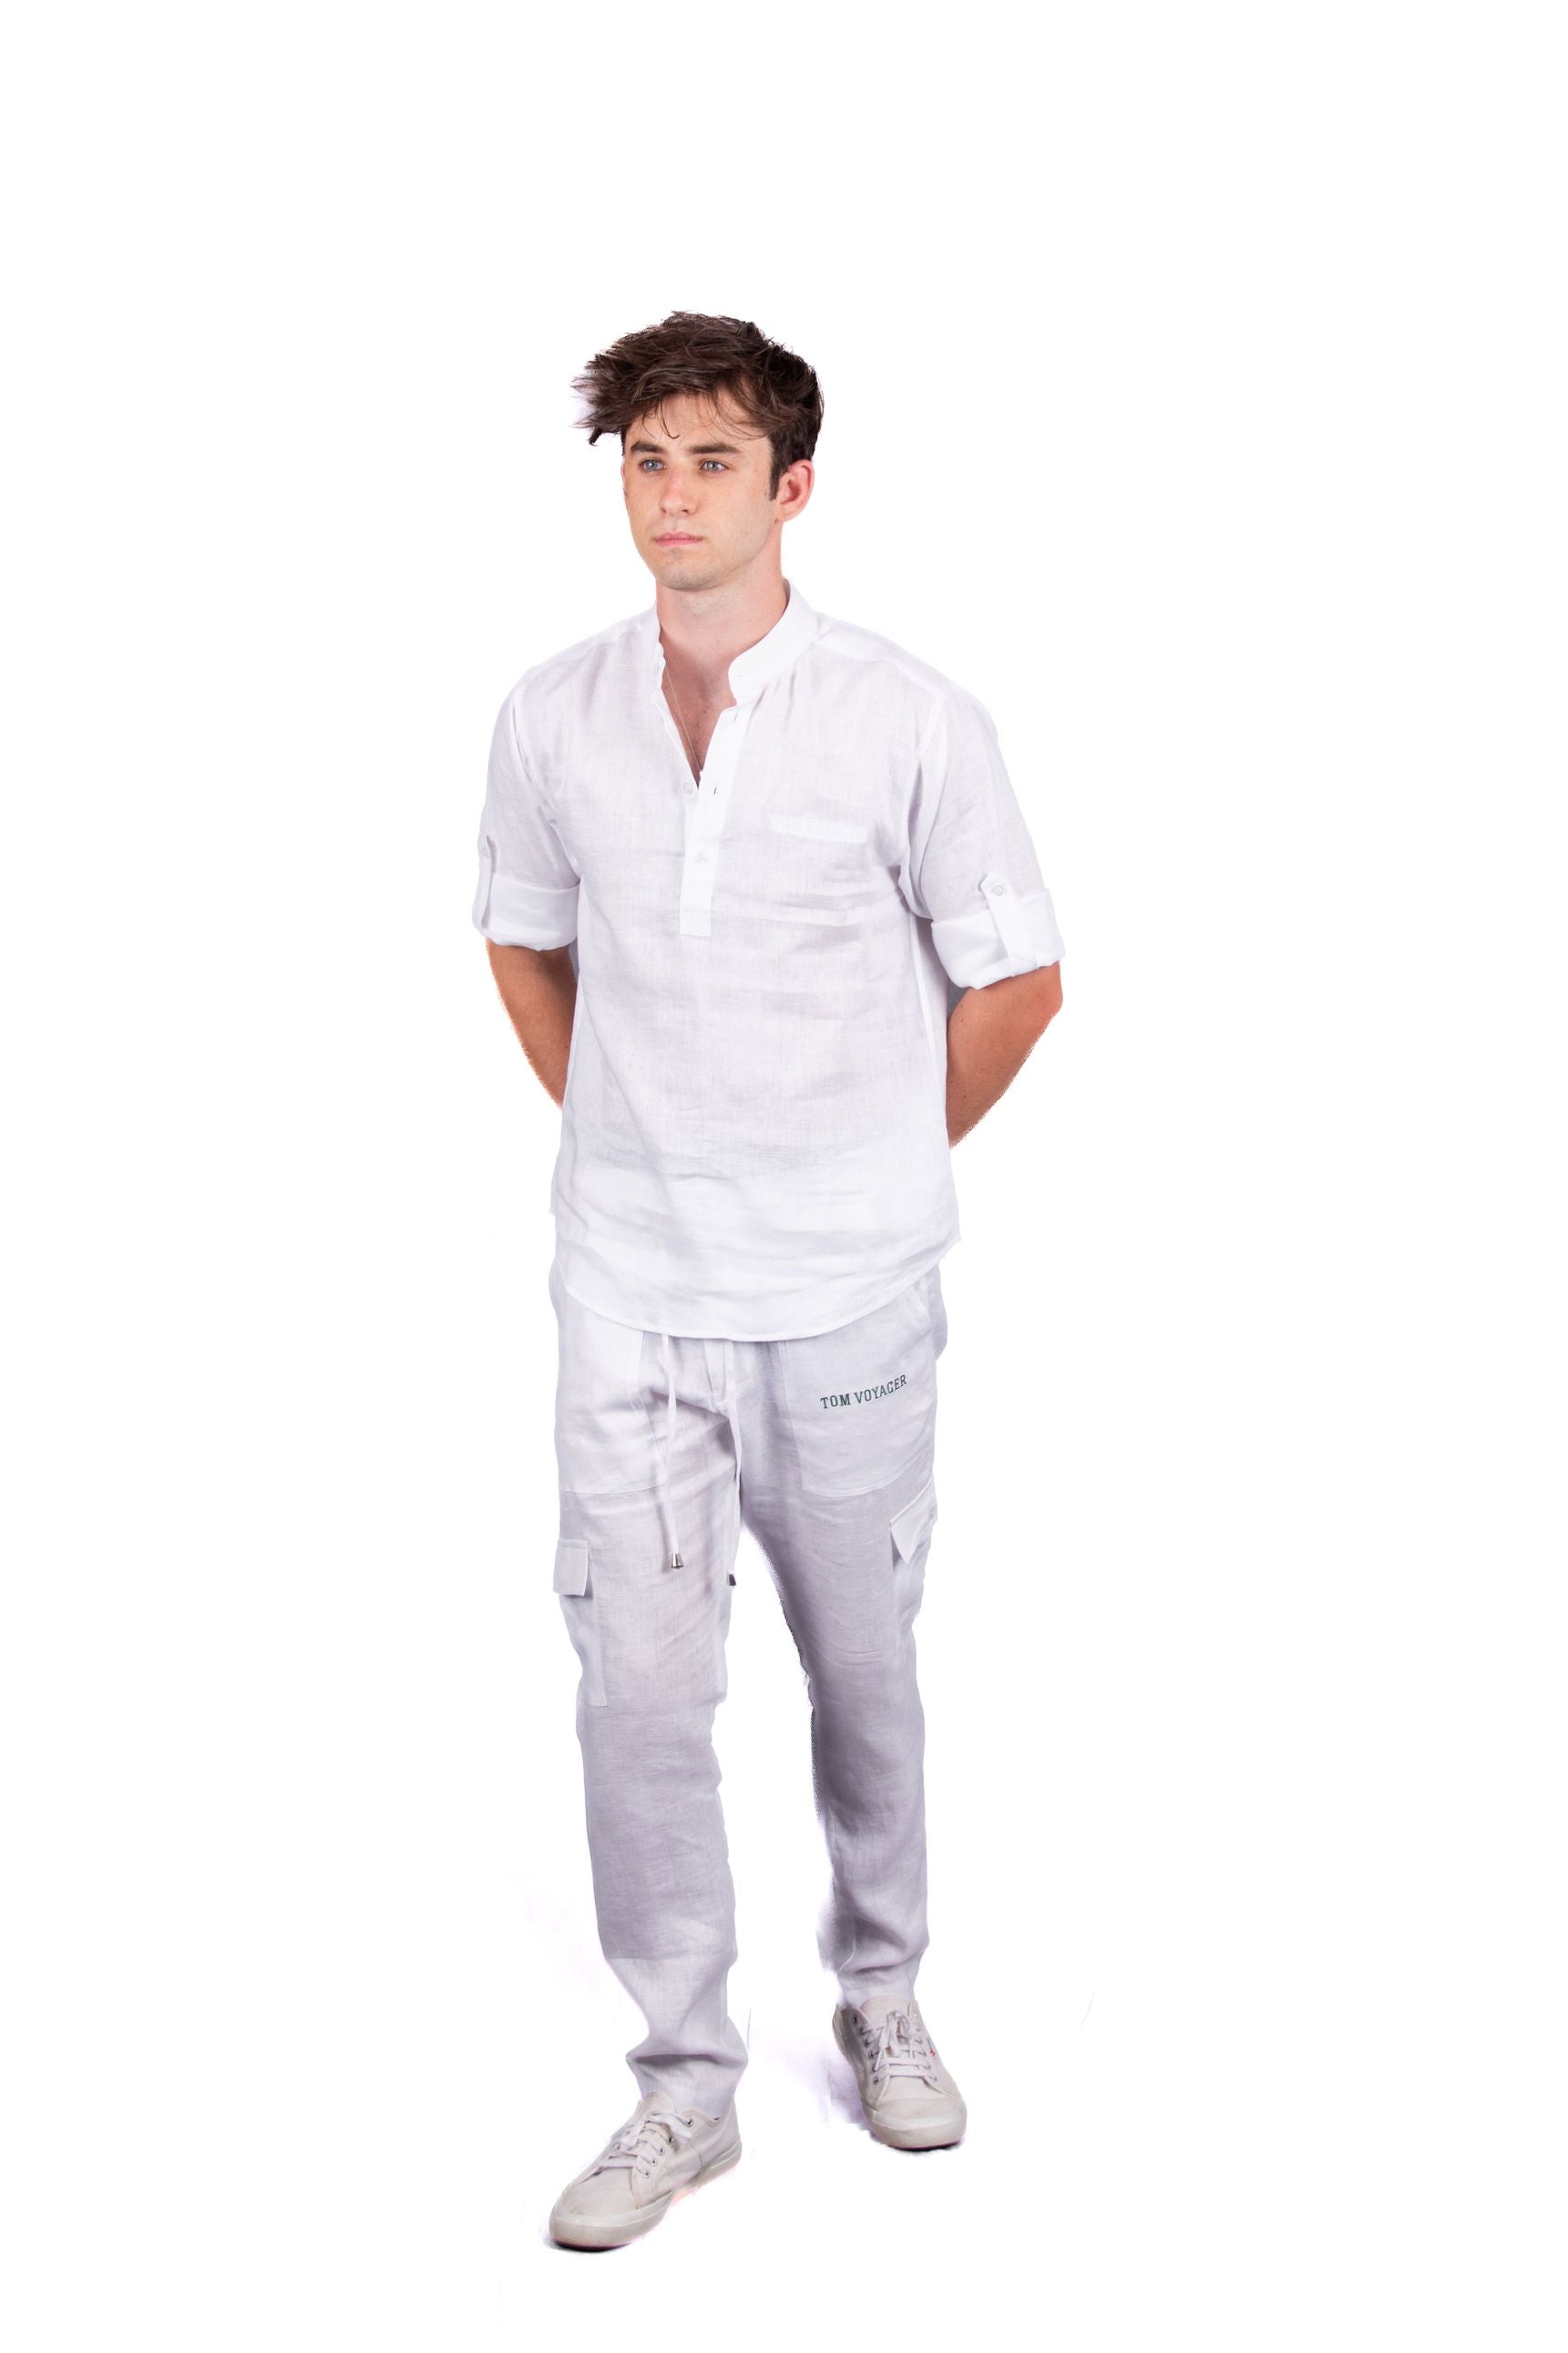 Flush mens linen shirts - linen shirts - white 2 - stylish and perfect for every occasion